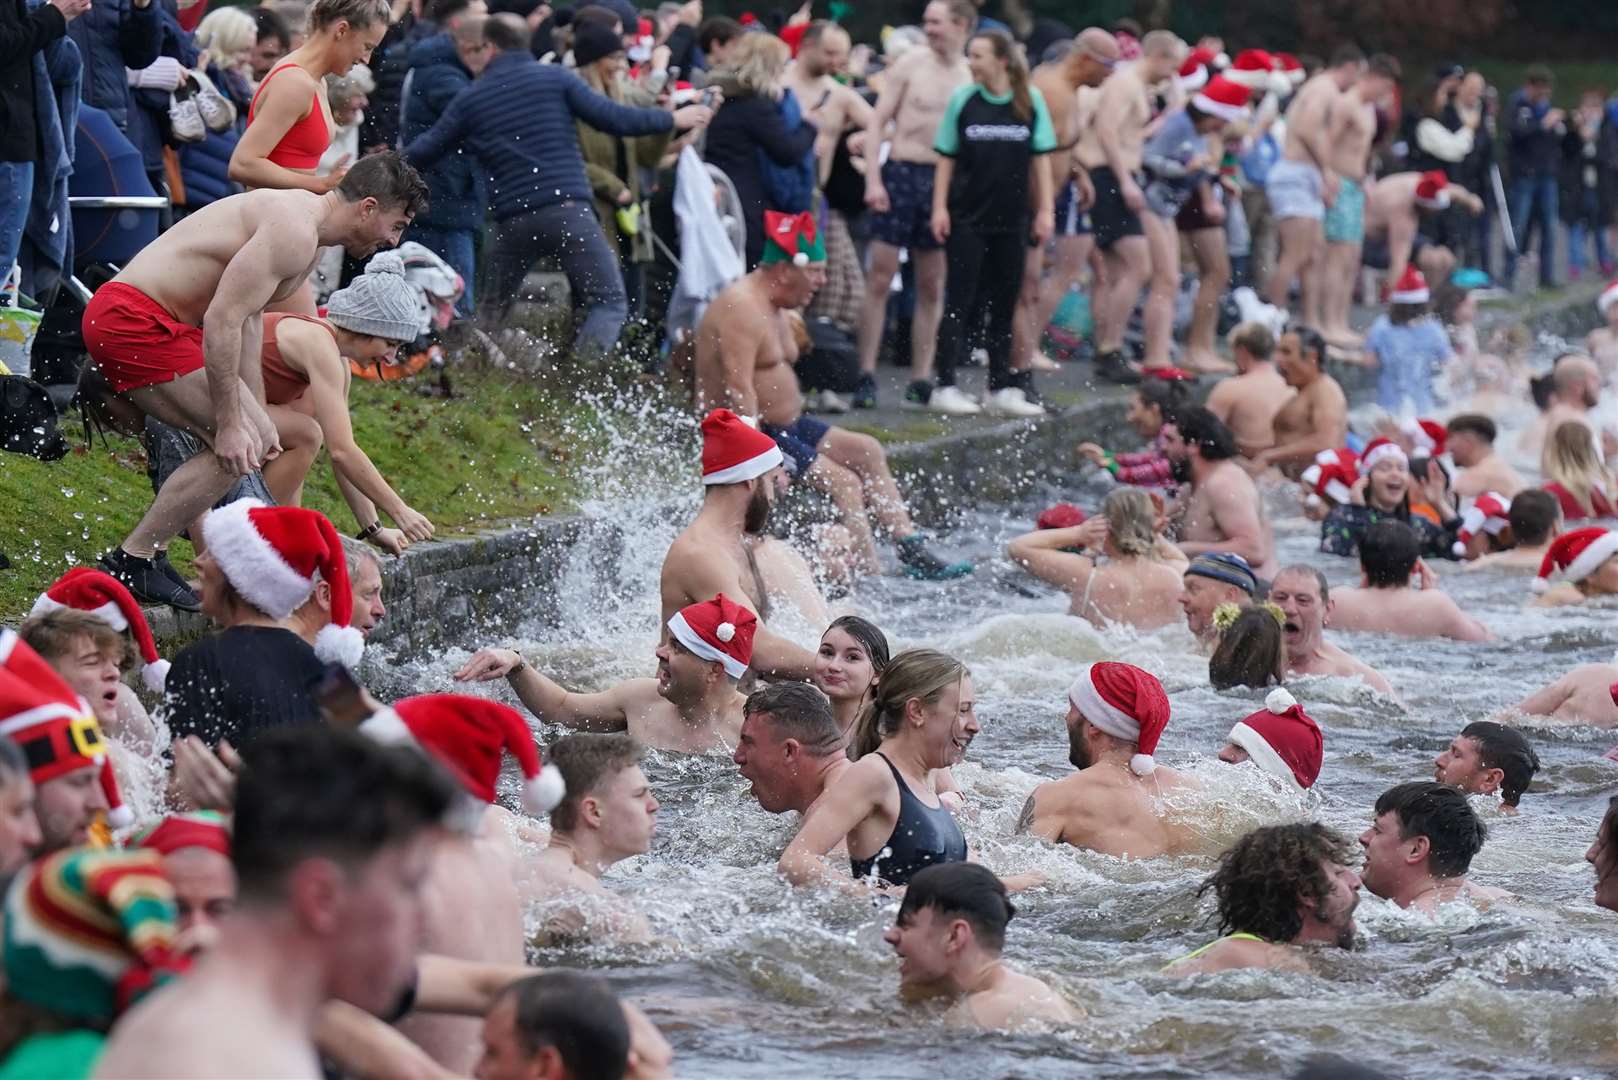 Santa hats featured on many of the hardy swimmers bobbing in the water (Jacob King/PA)